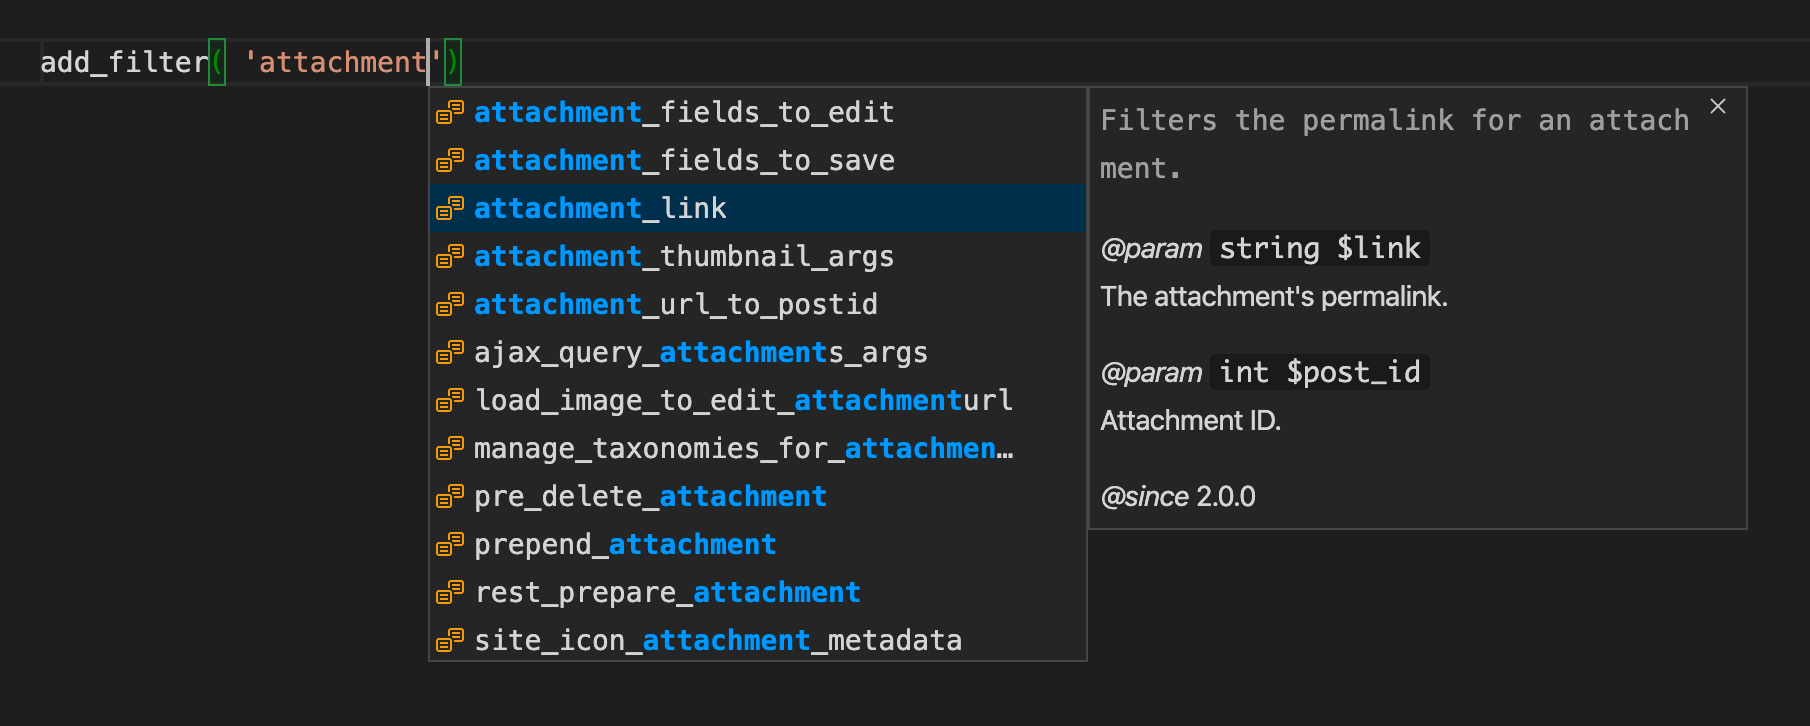 Screenshot of VS Code showing an autocomplete list for the first parameter of the add_filter function